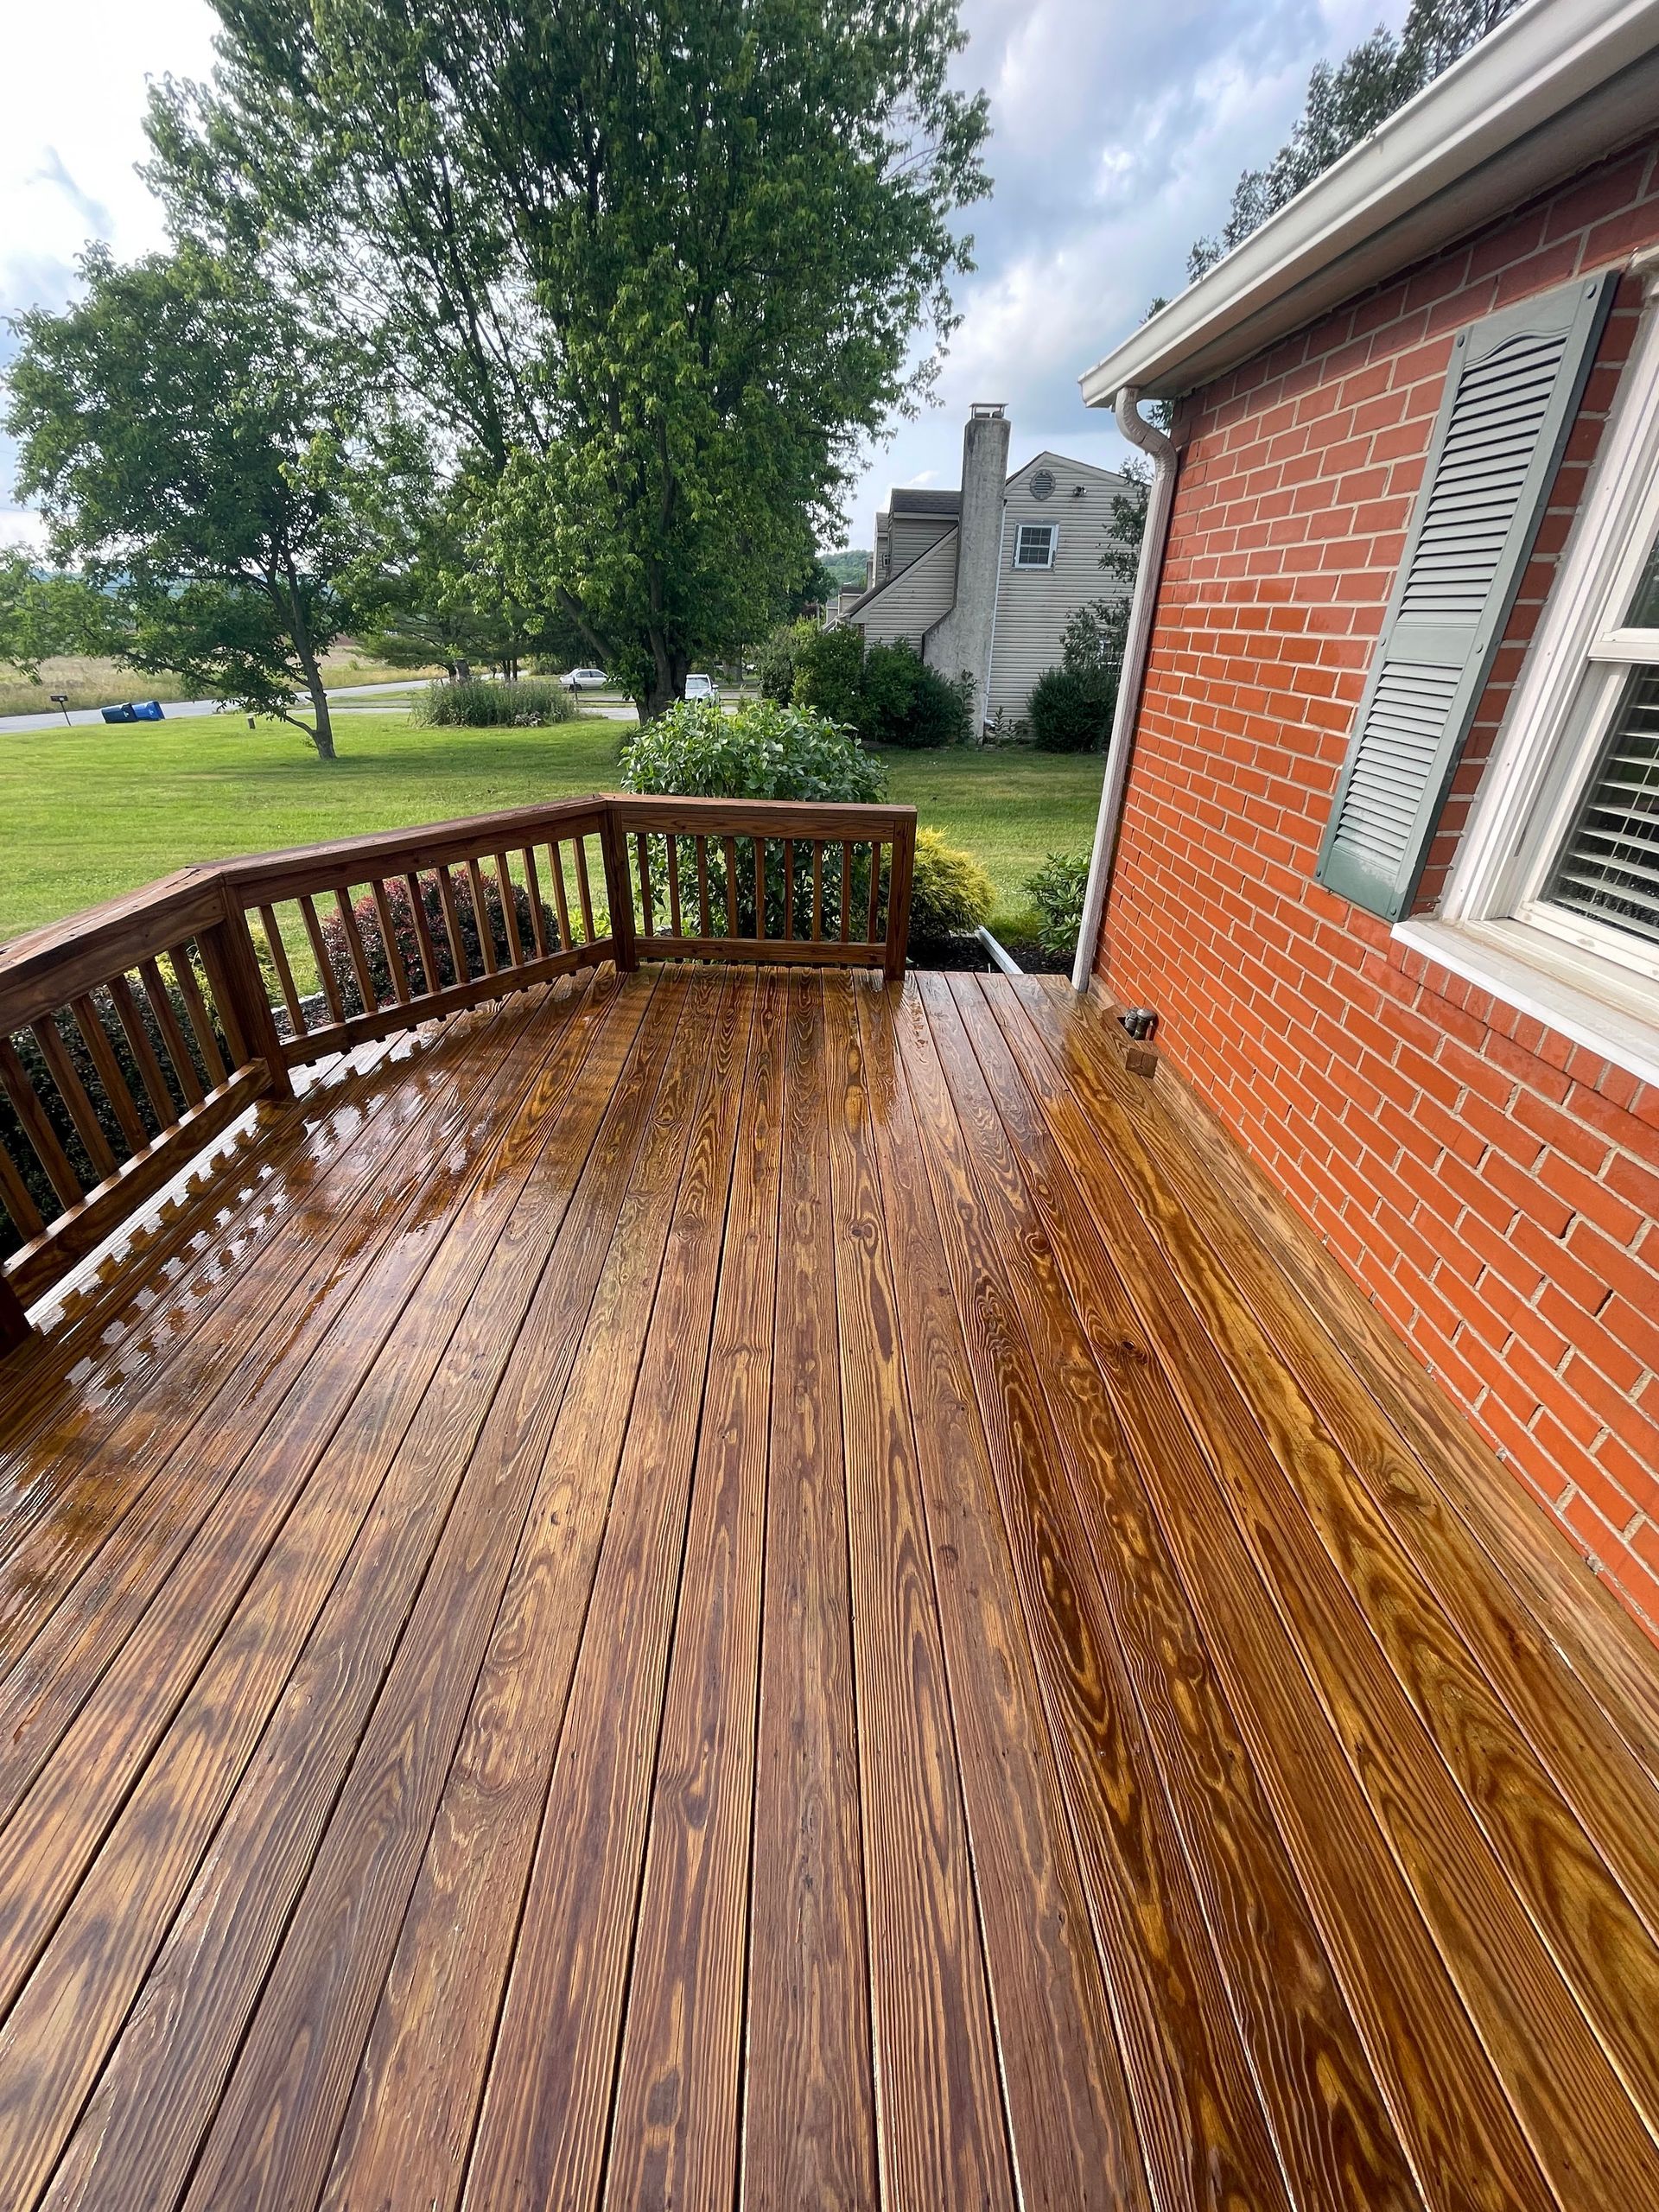 After Power Washing the Deck